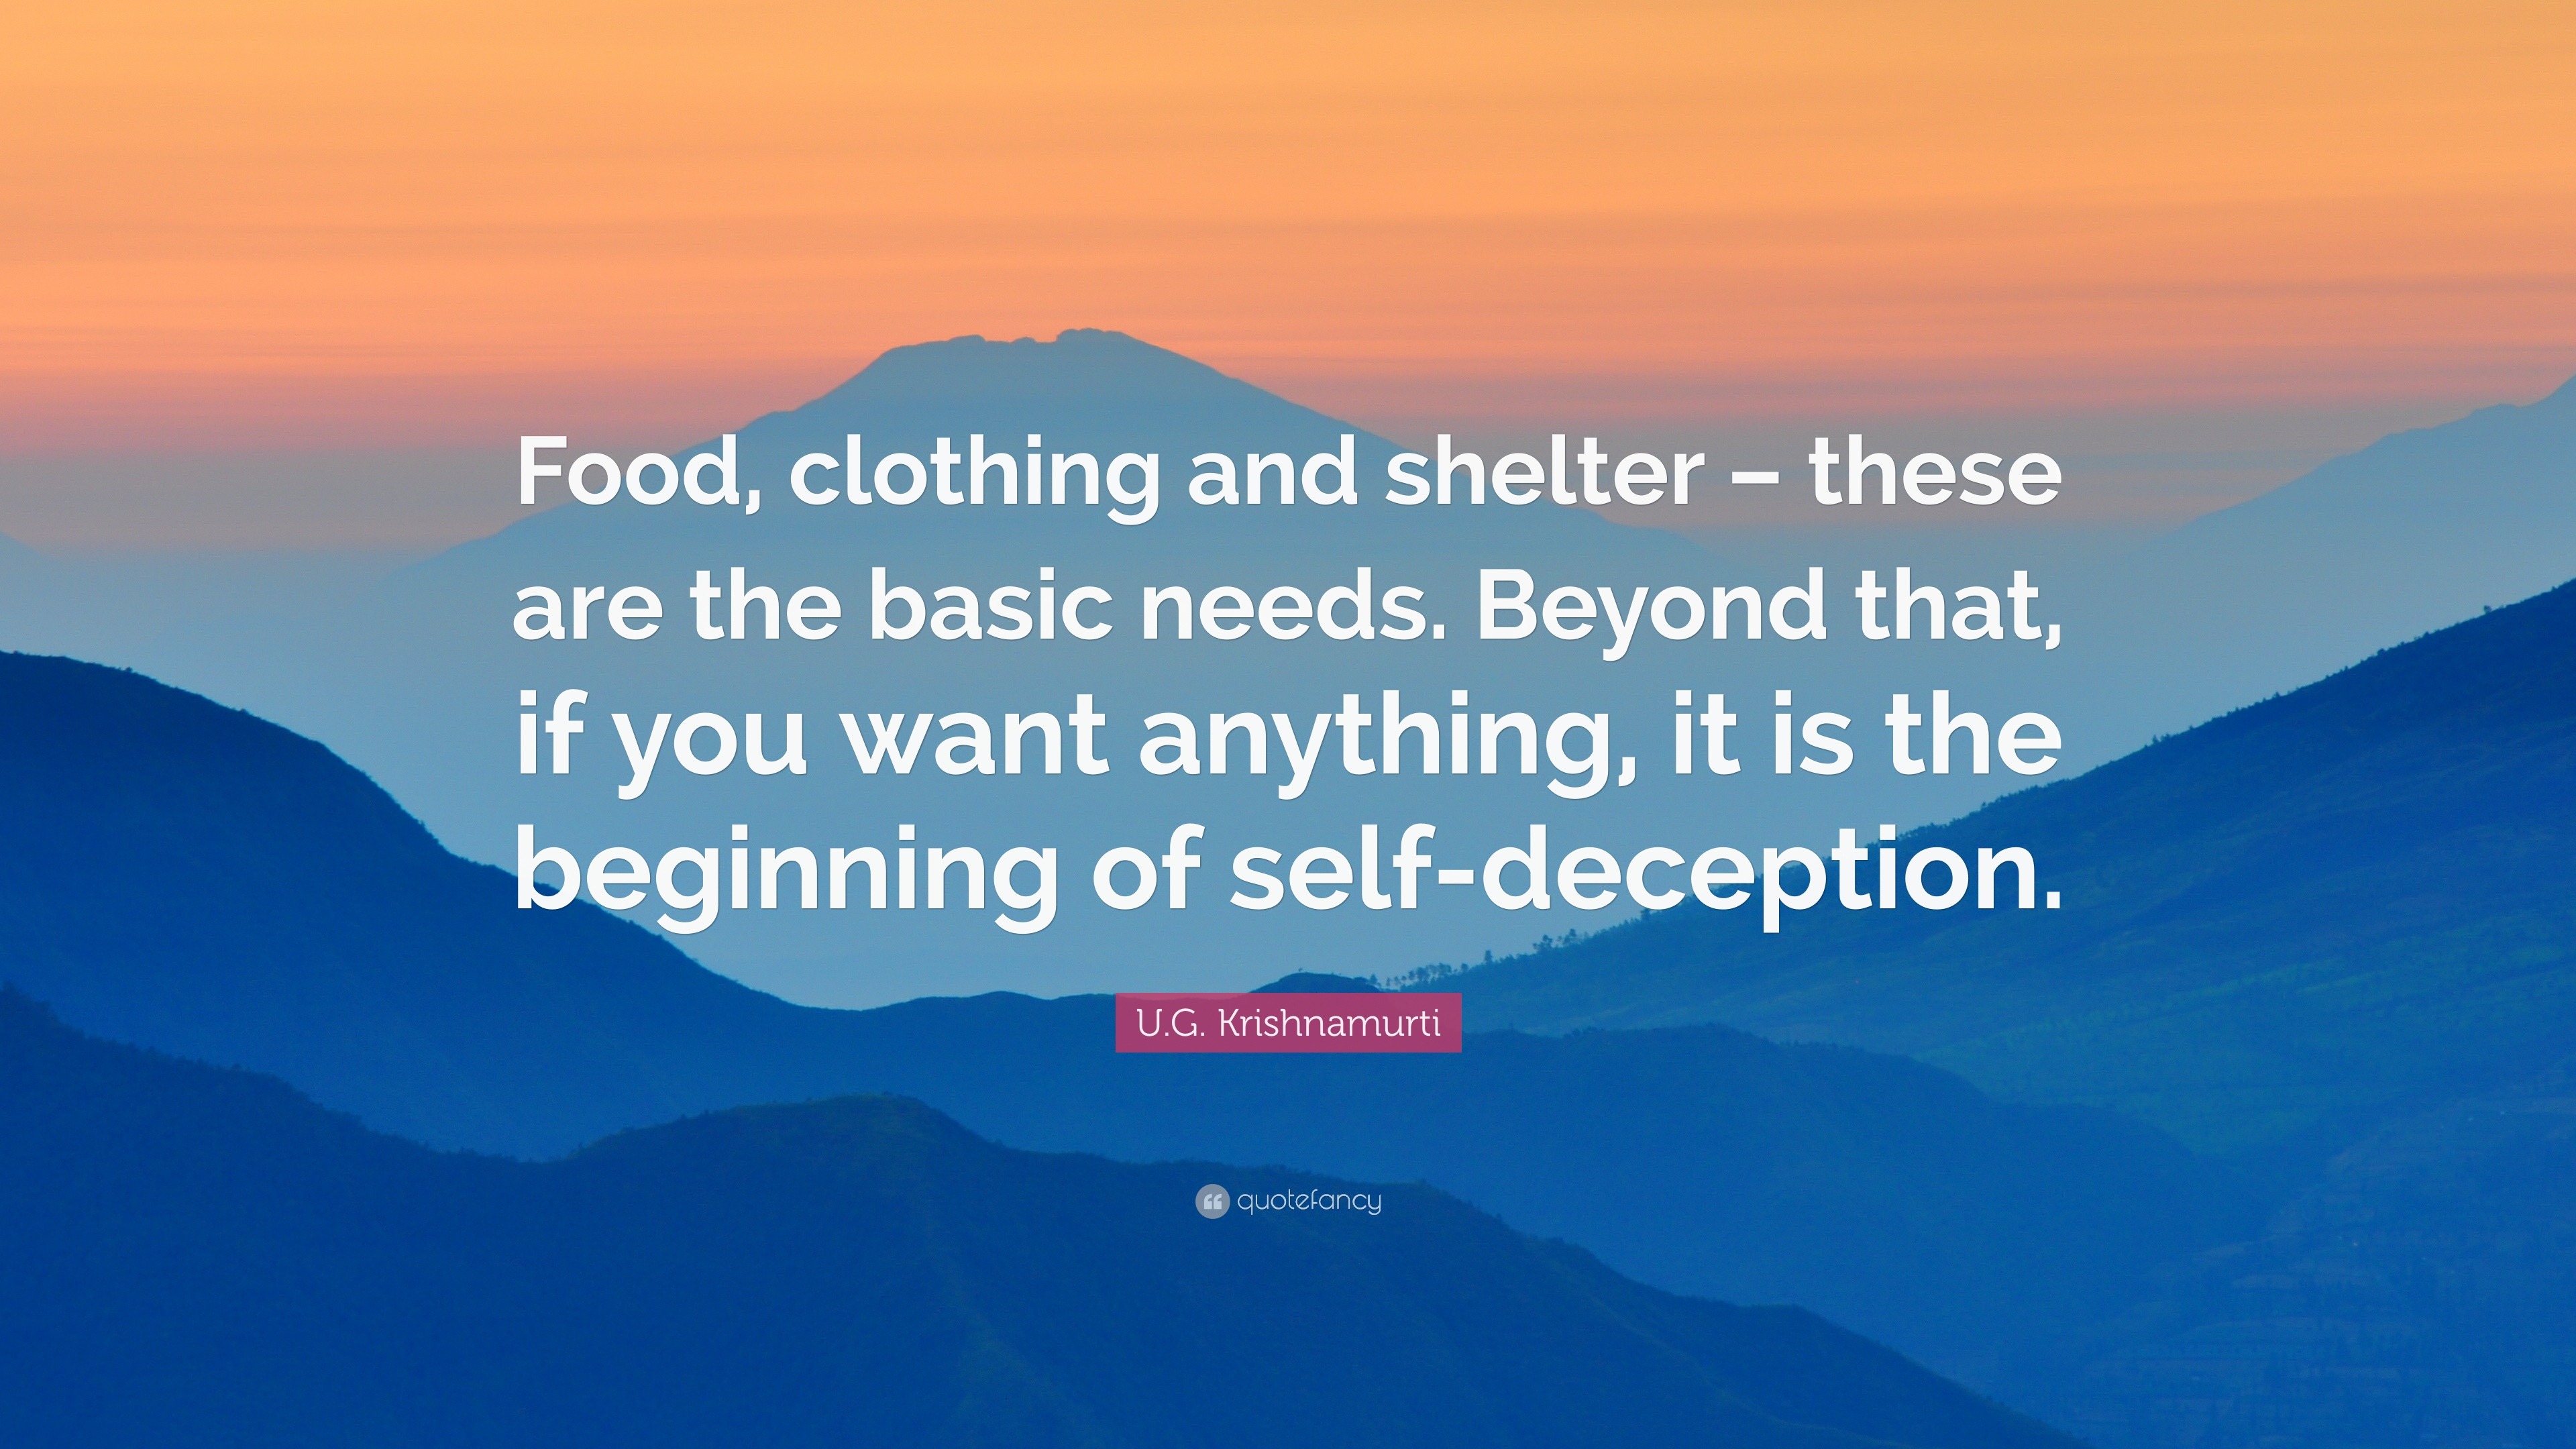 U.G. Krishnamurti Quote: “Food, clothing and shelter – these are the basic  needs. Beyond that, if you want anything, it is the beginning of self-d”